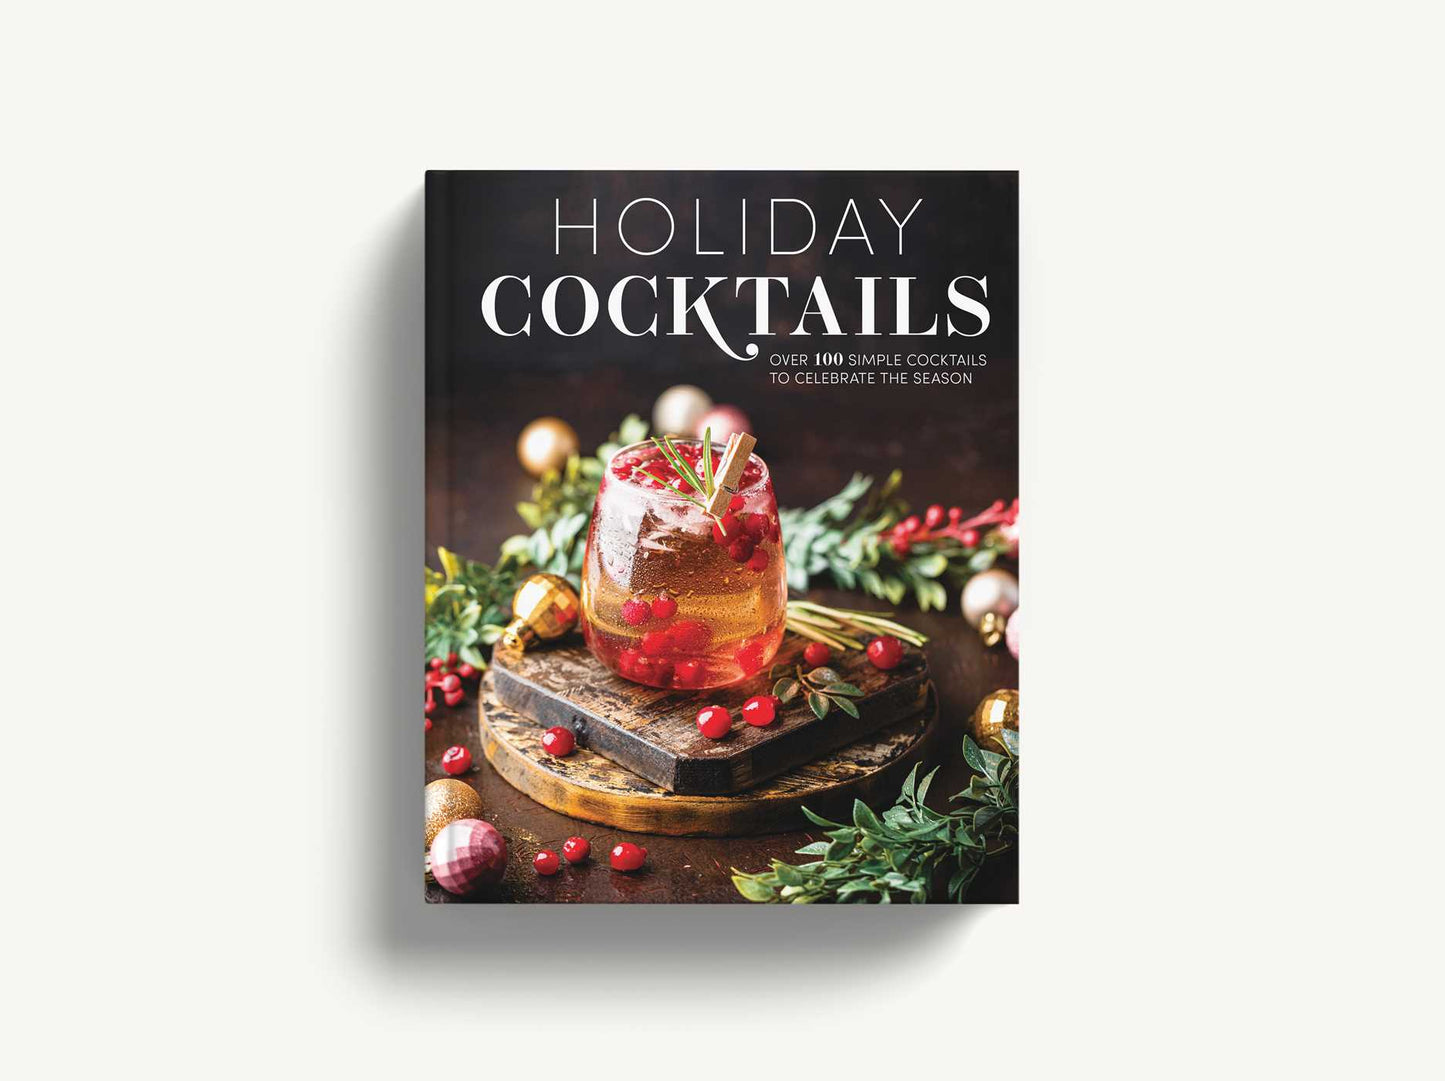 Holiday Cocktails: Over 100 Simple Cocktails to Celebrate the Season